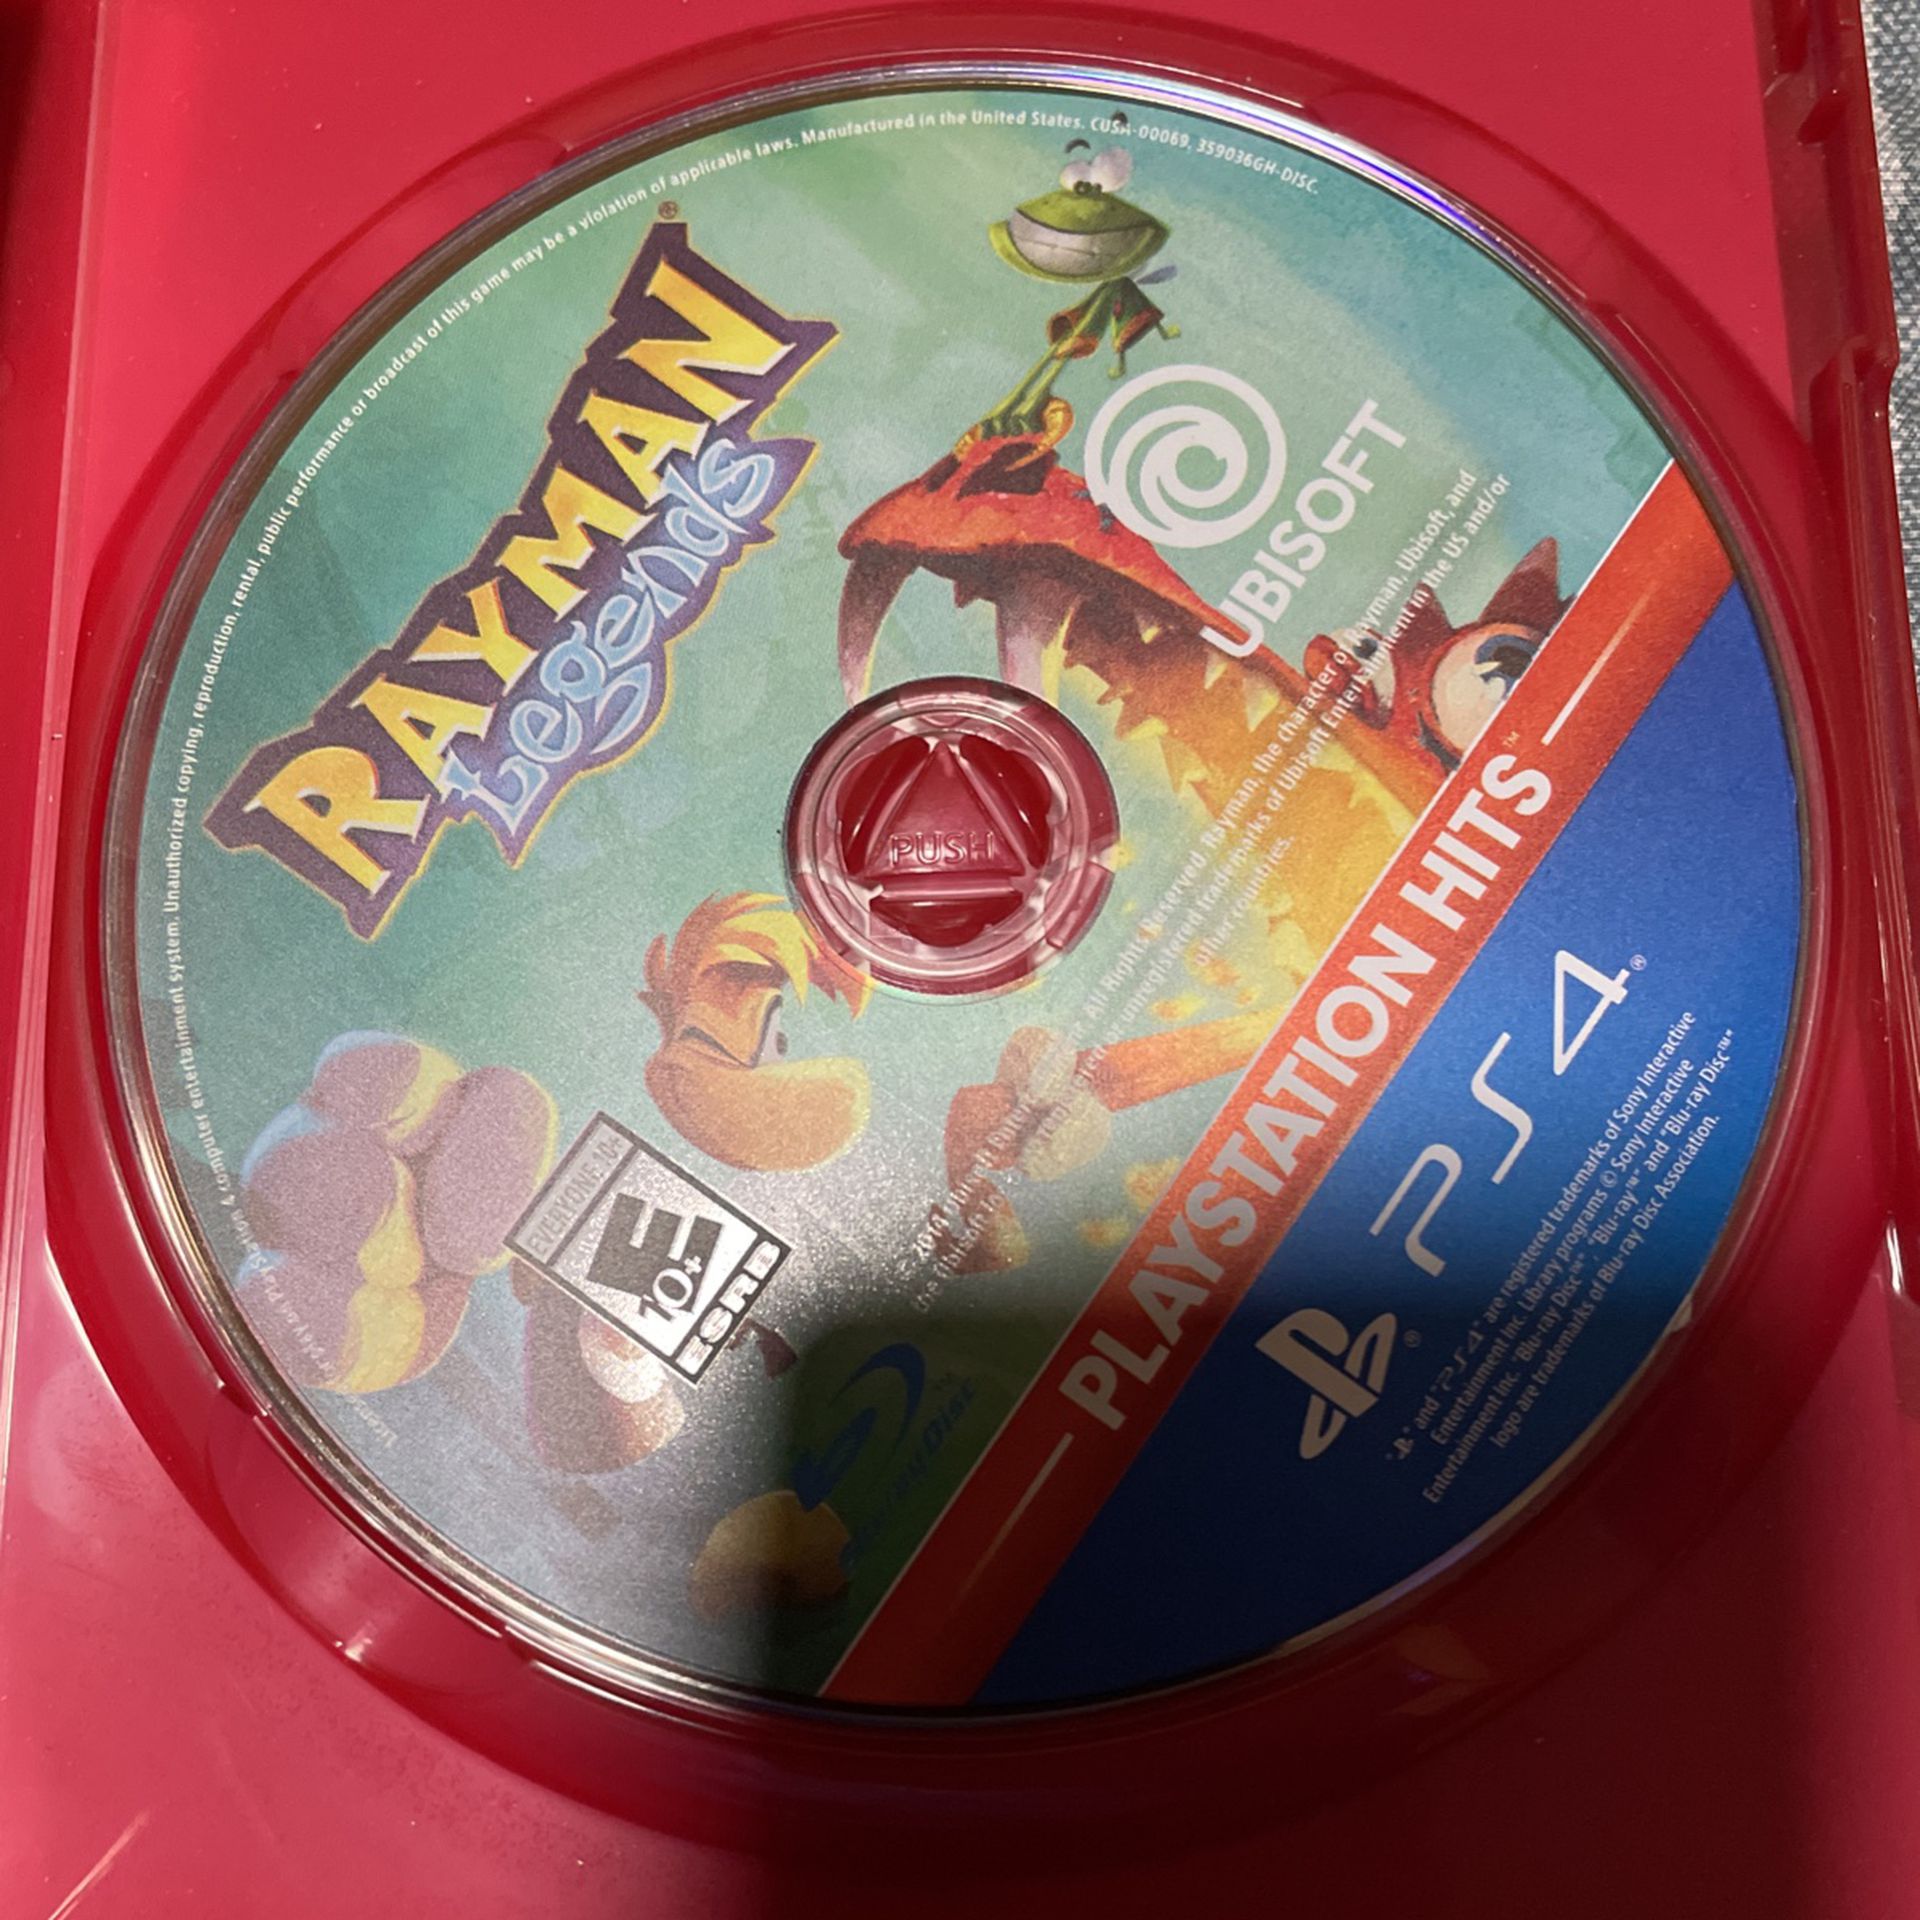 Rayman Legends - Pre-Played / Disc Only - Pre-Played / Disc Only